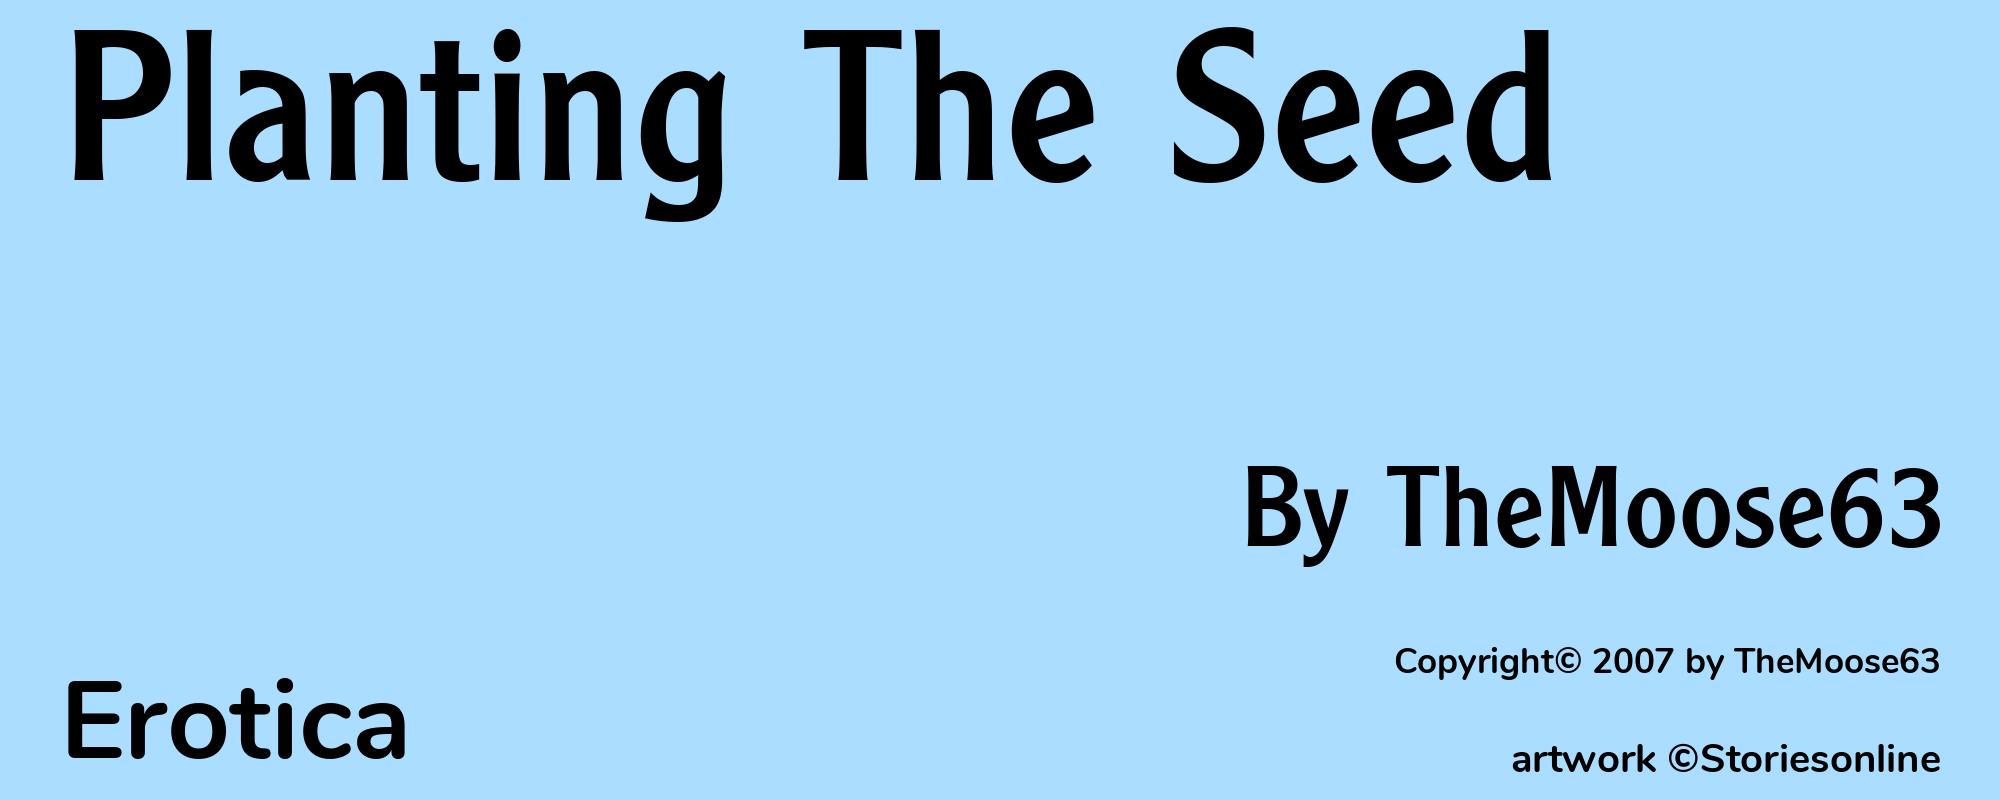 Planting The Seed - Cover